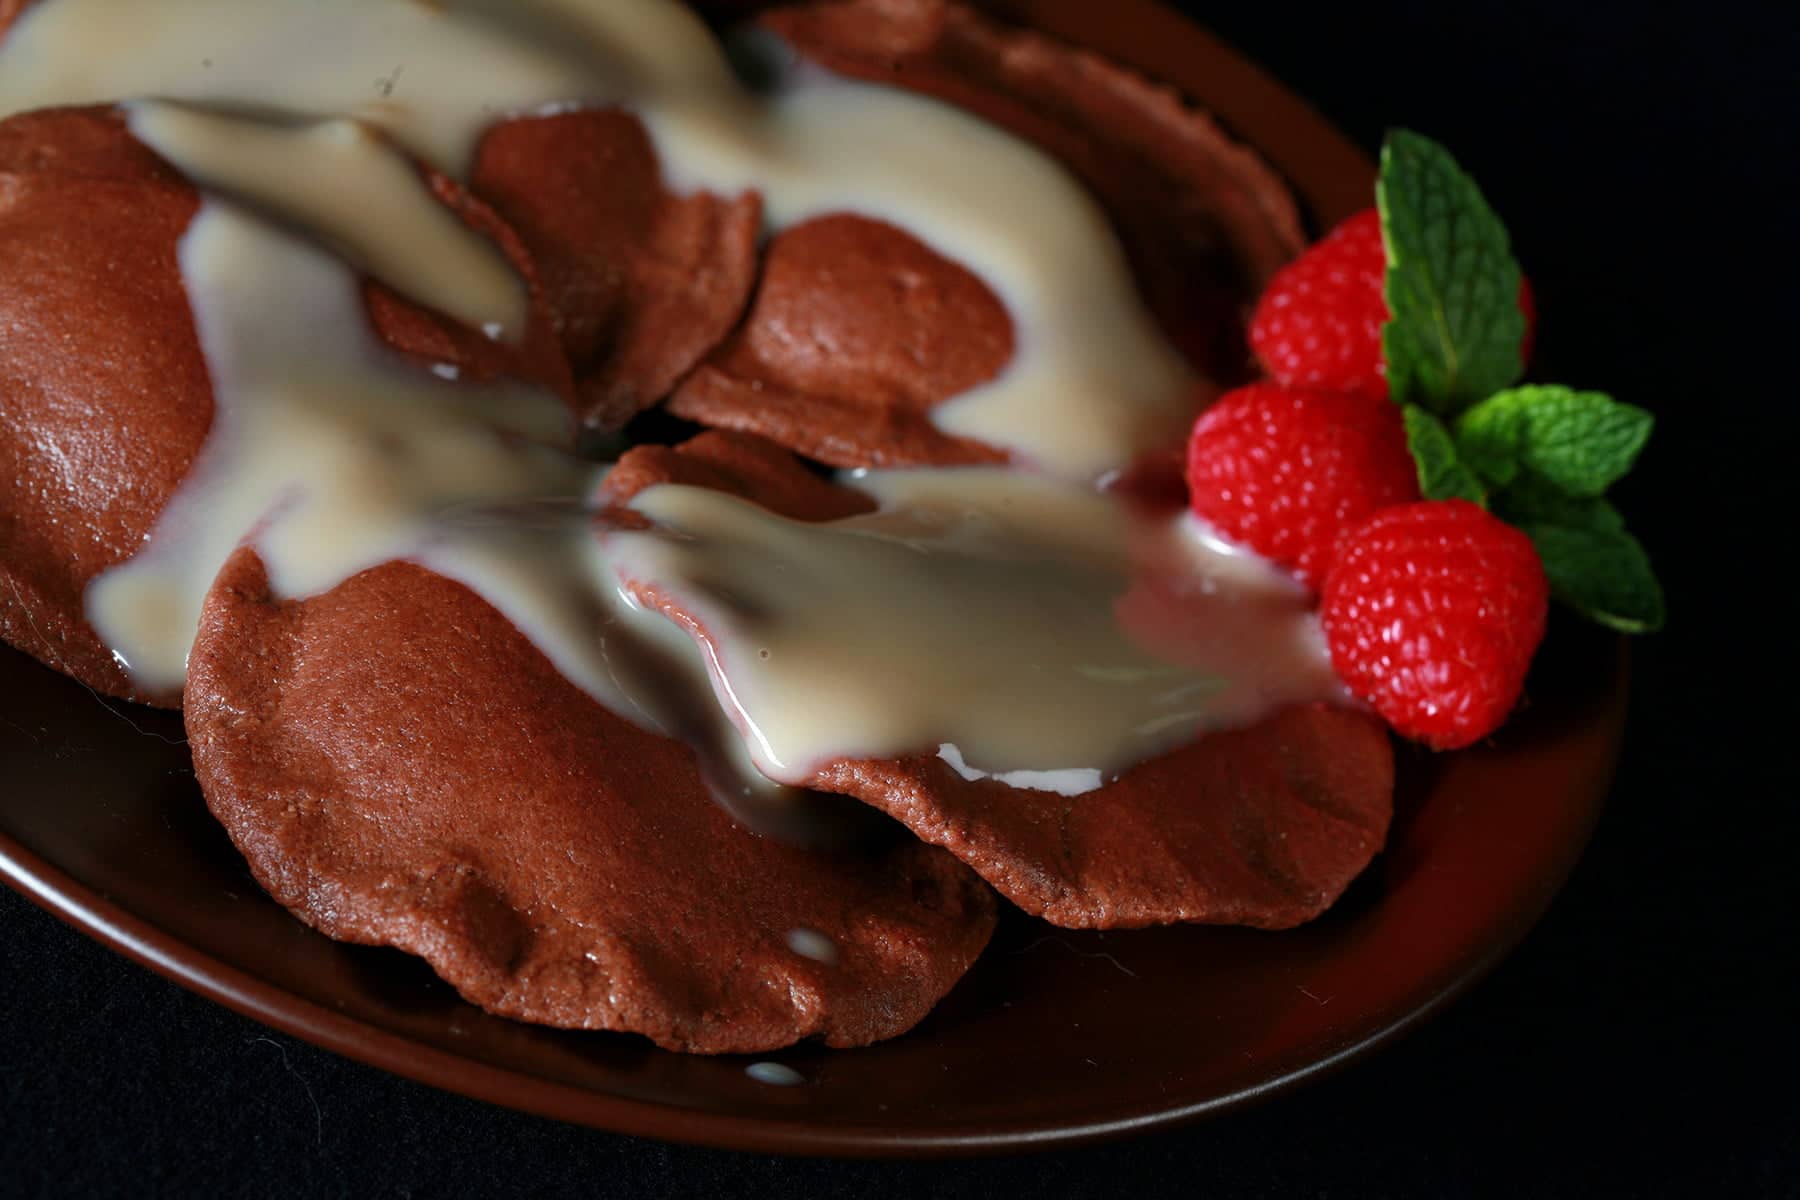 Chocolate Ravioli, arranged on a dark plate. It is drizzled with a cream sauce, and raspberries and a mint spring.